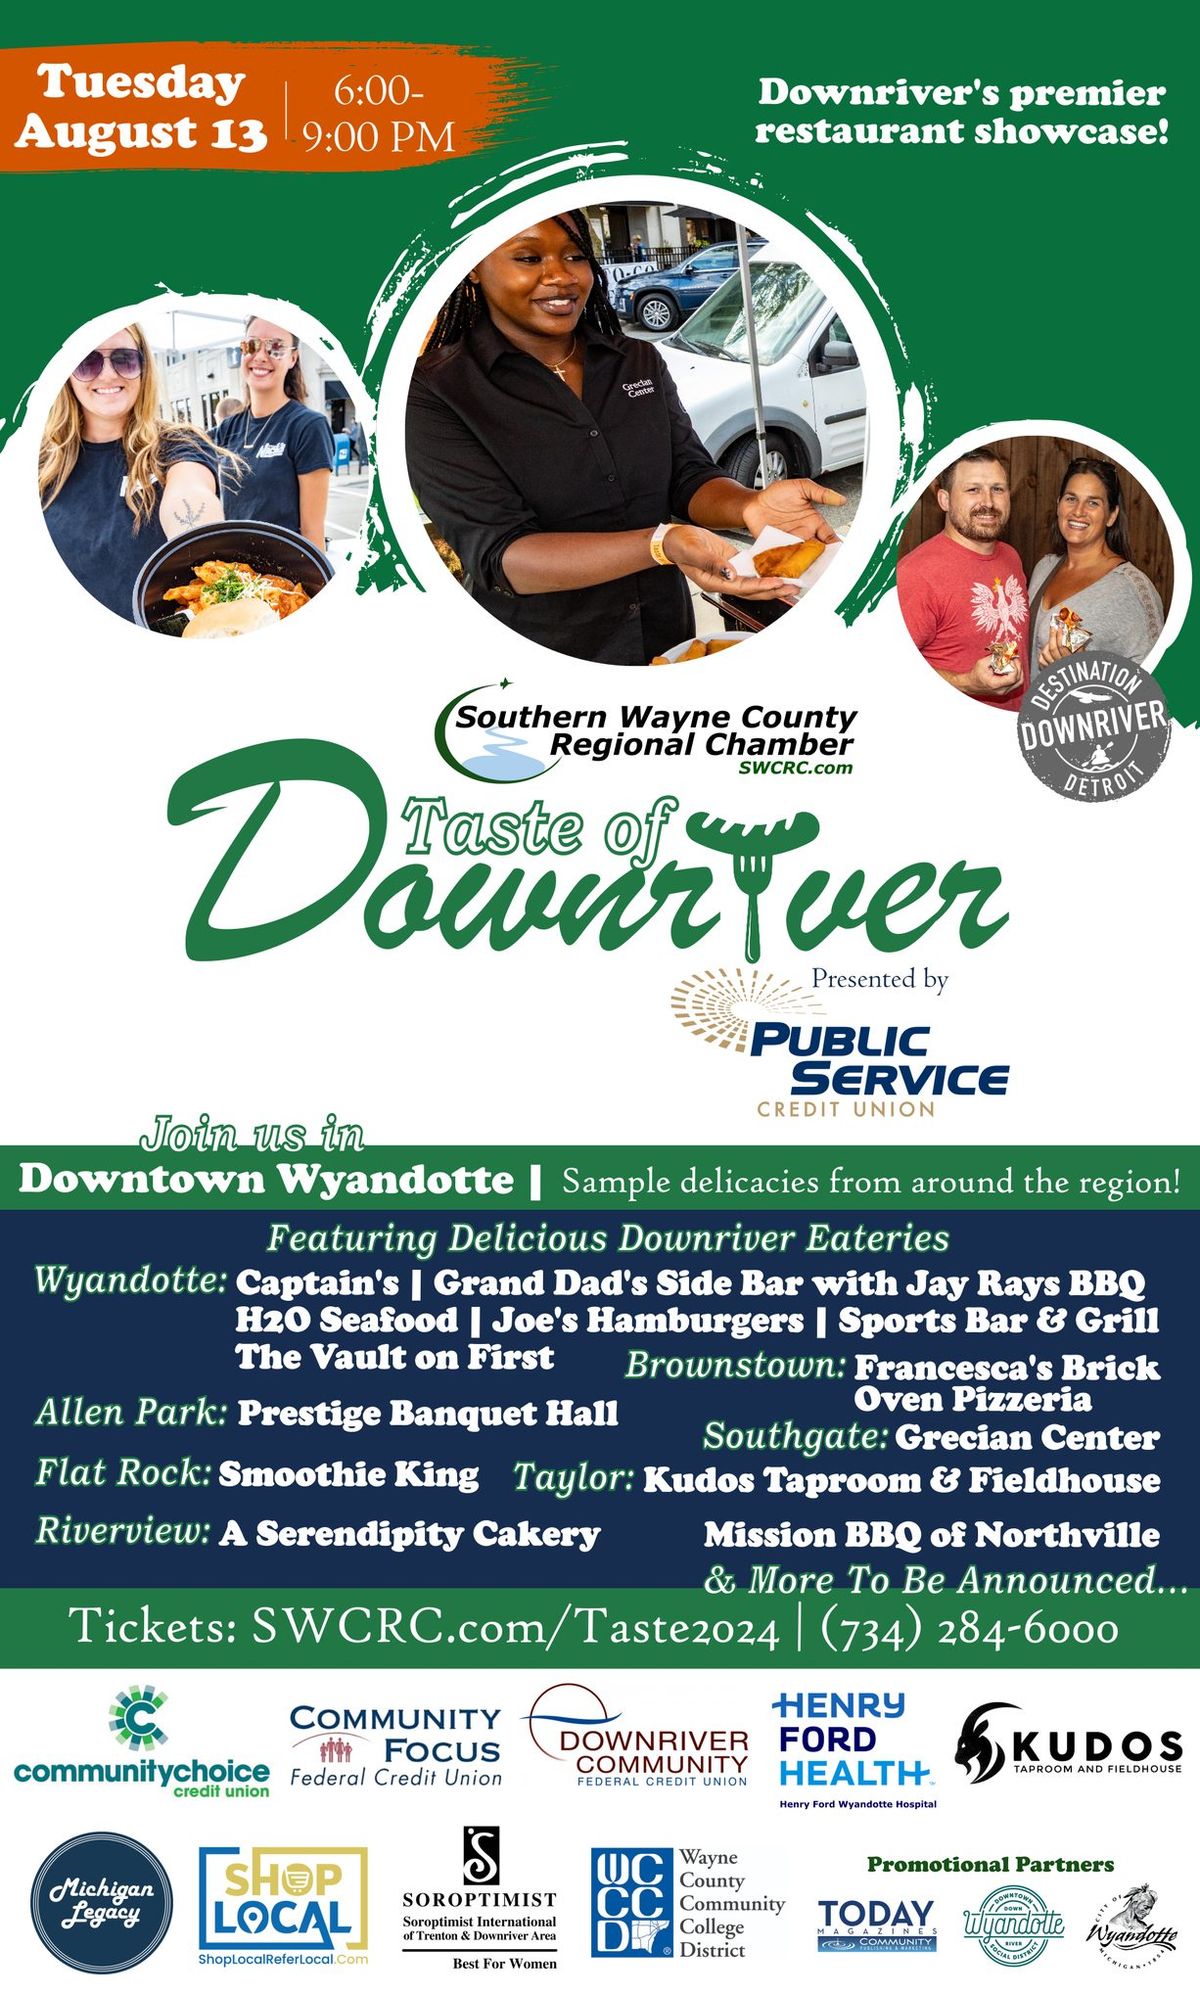 Taste of Downriver presented by Public Service Credit Union